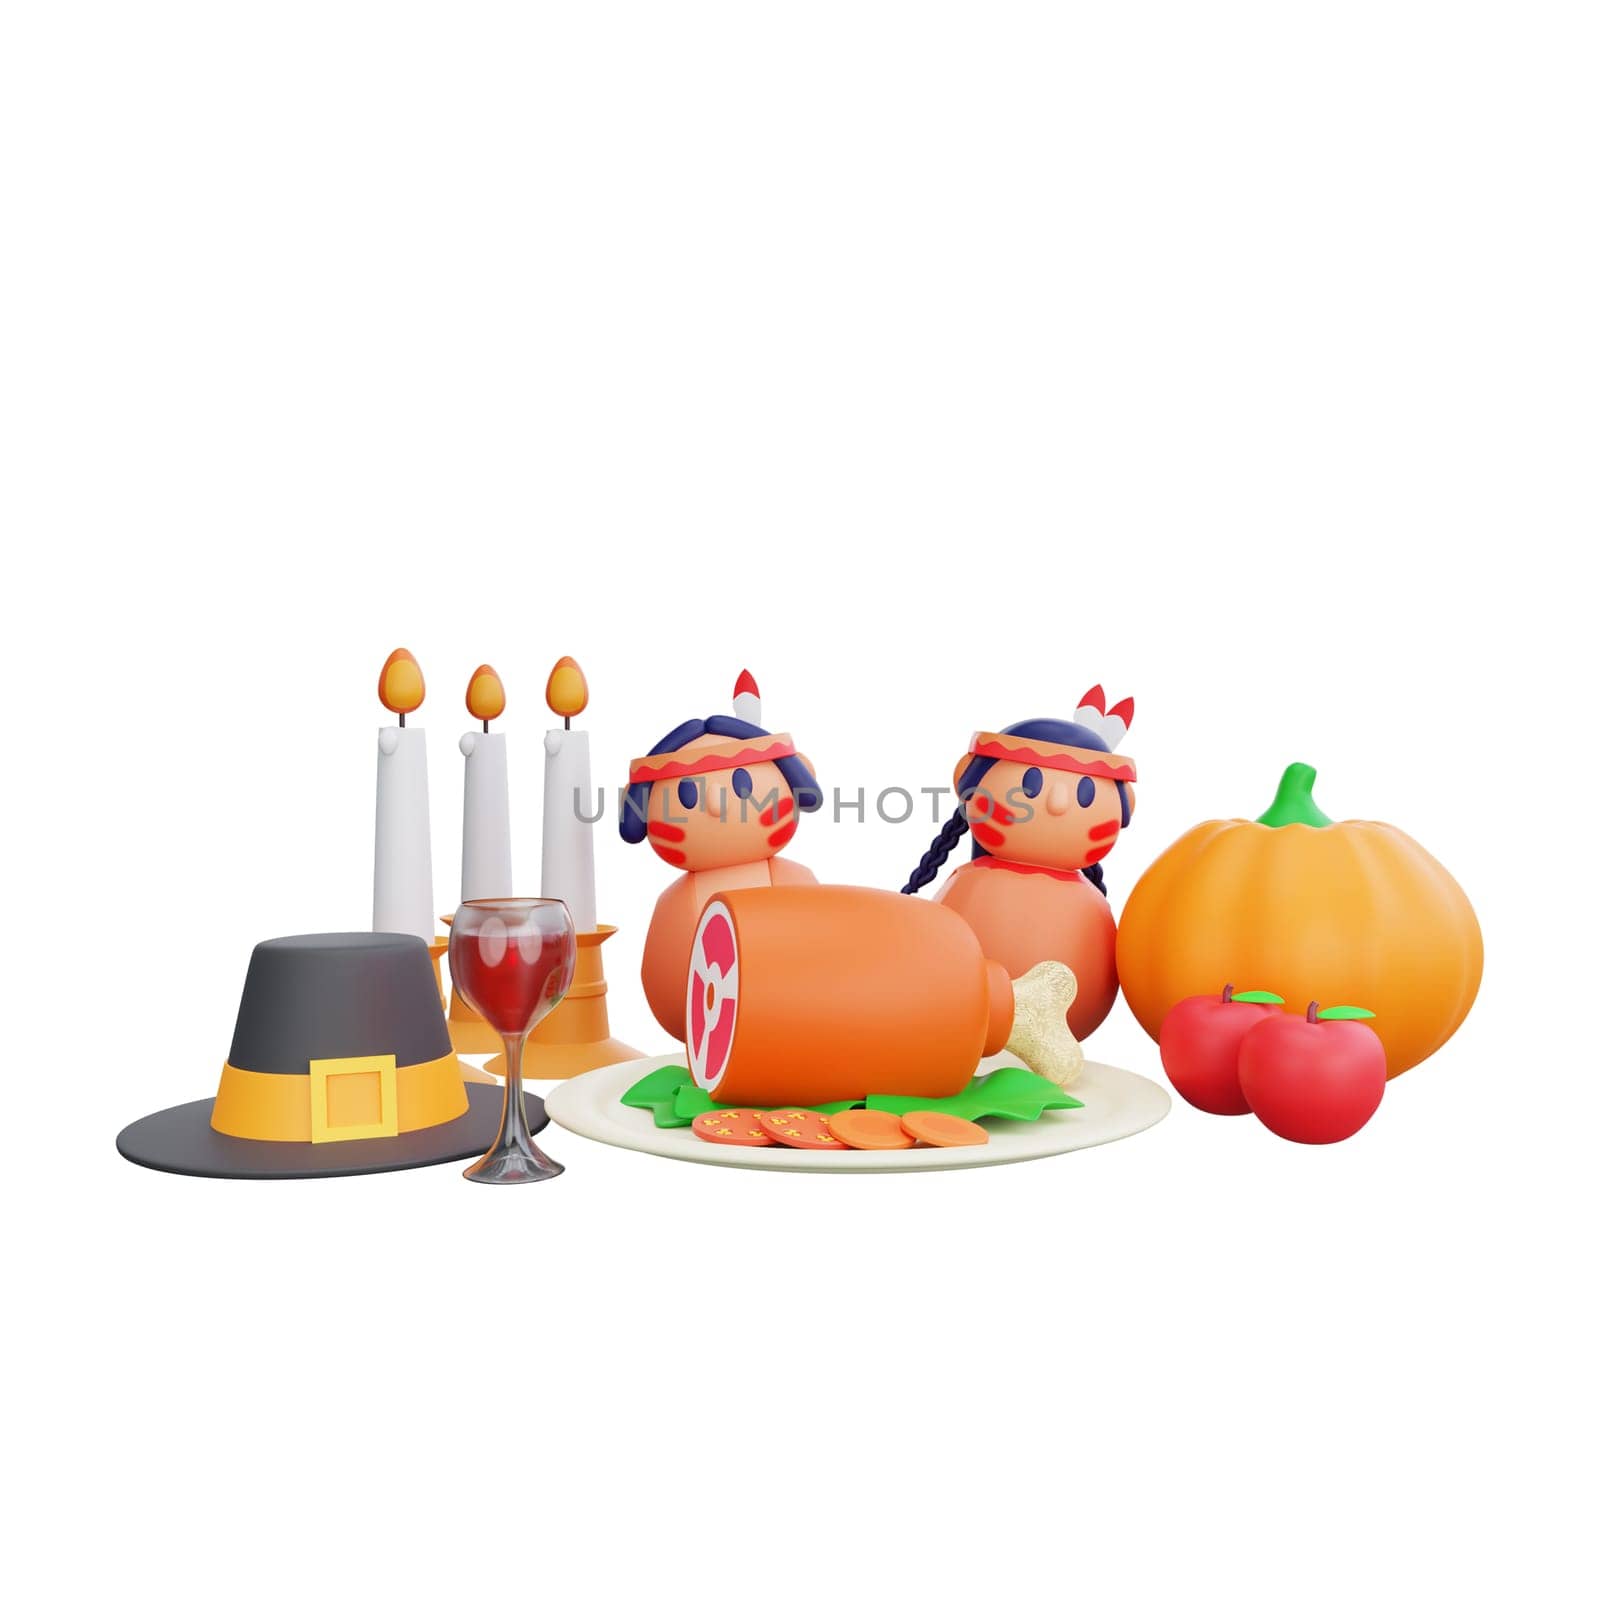 3D rendering of a festive Thanksgiving table setting, featuring a Native American doll, a pumpkin, a pilgrim hat, candles, and more